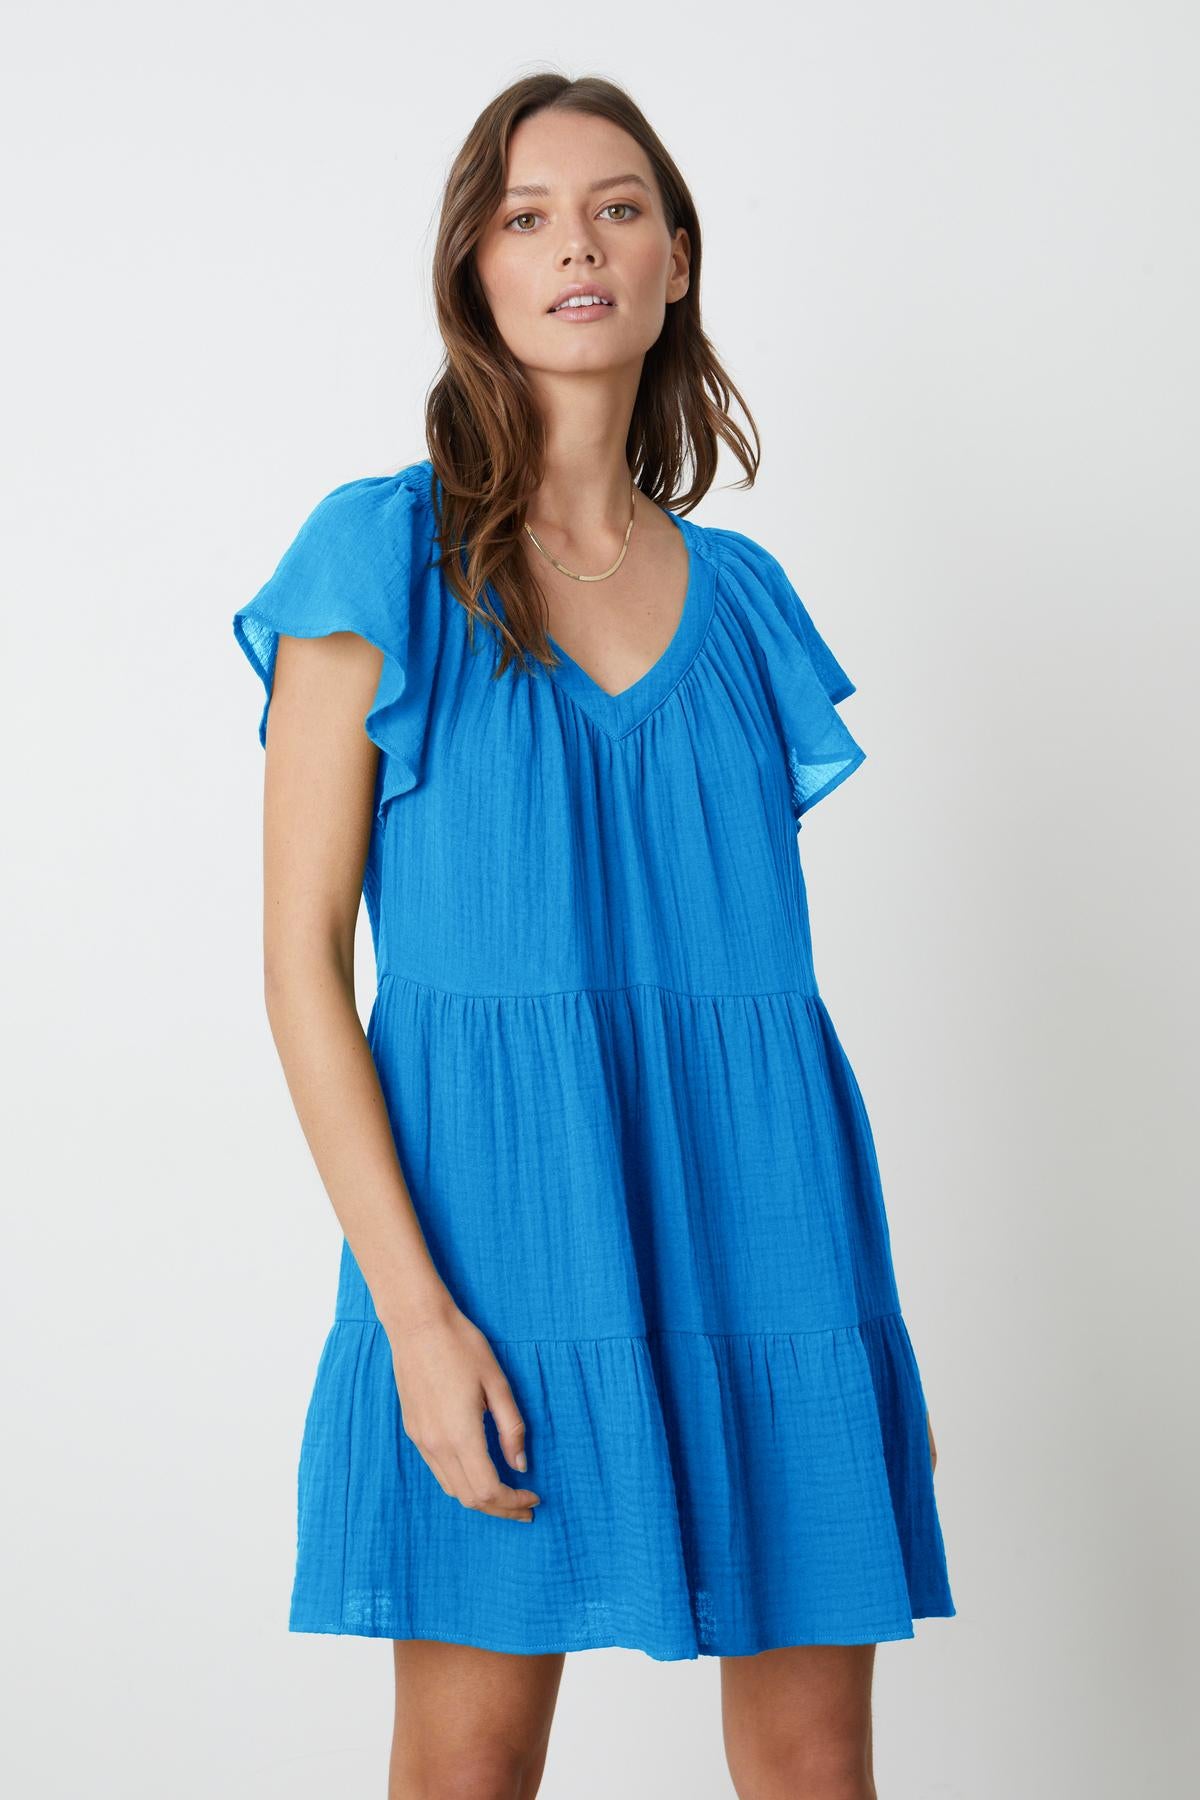 A woman is wearing the Velvet by Graham & Spencer ELEANOR COTTON GAUZE TIERED DRESS with frilled sleeves.-35201175355585